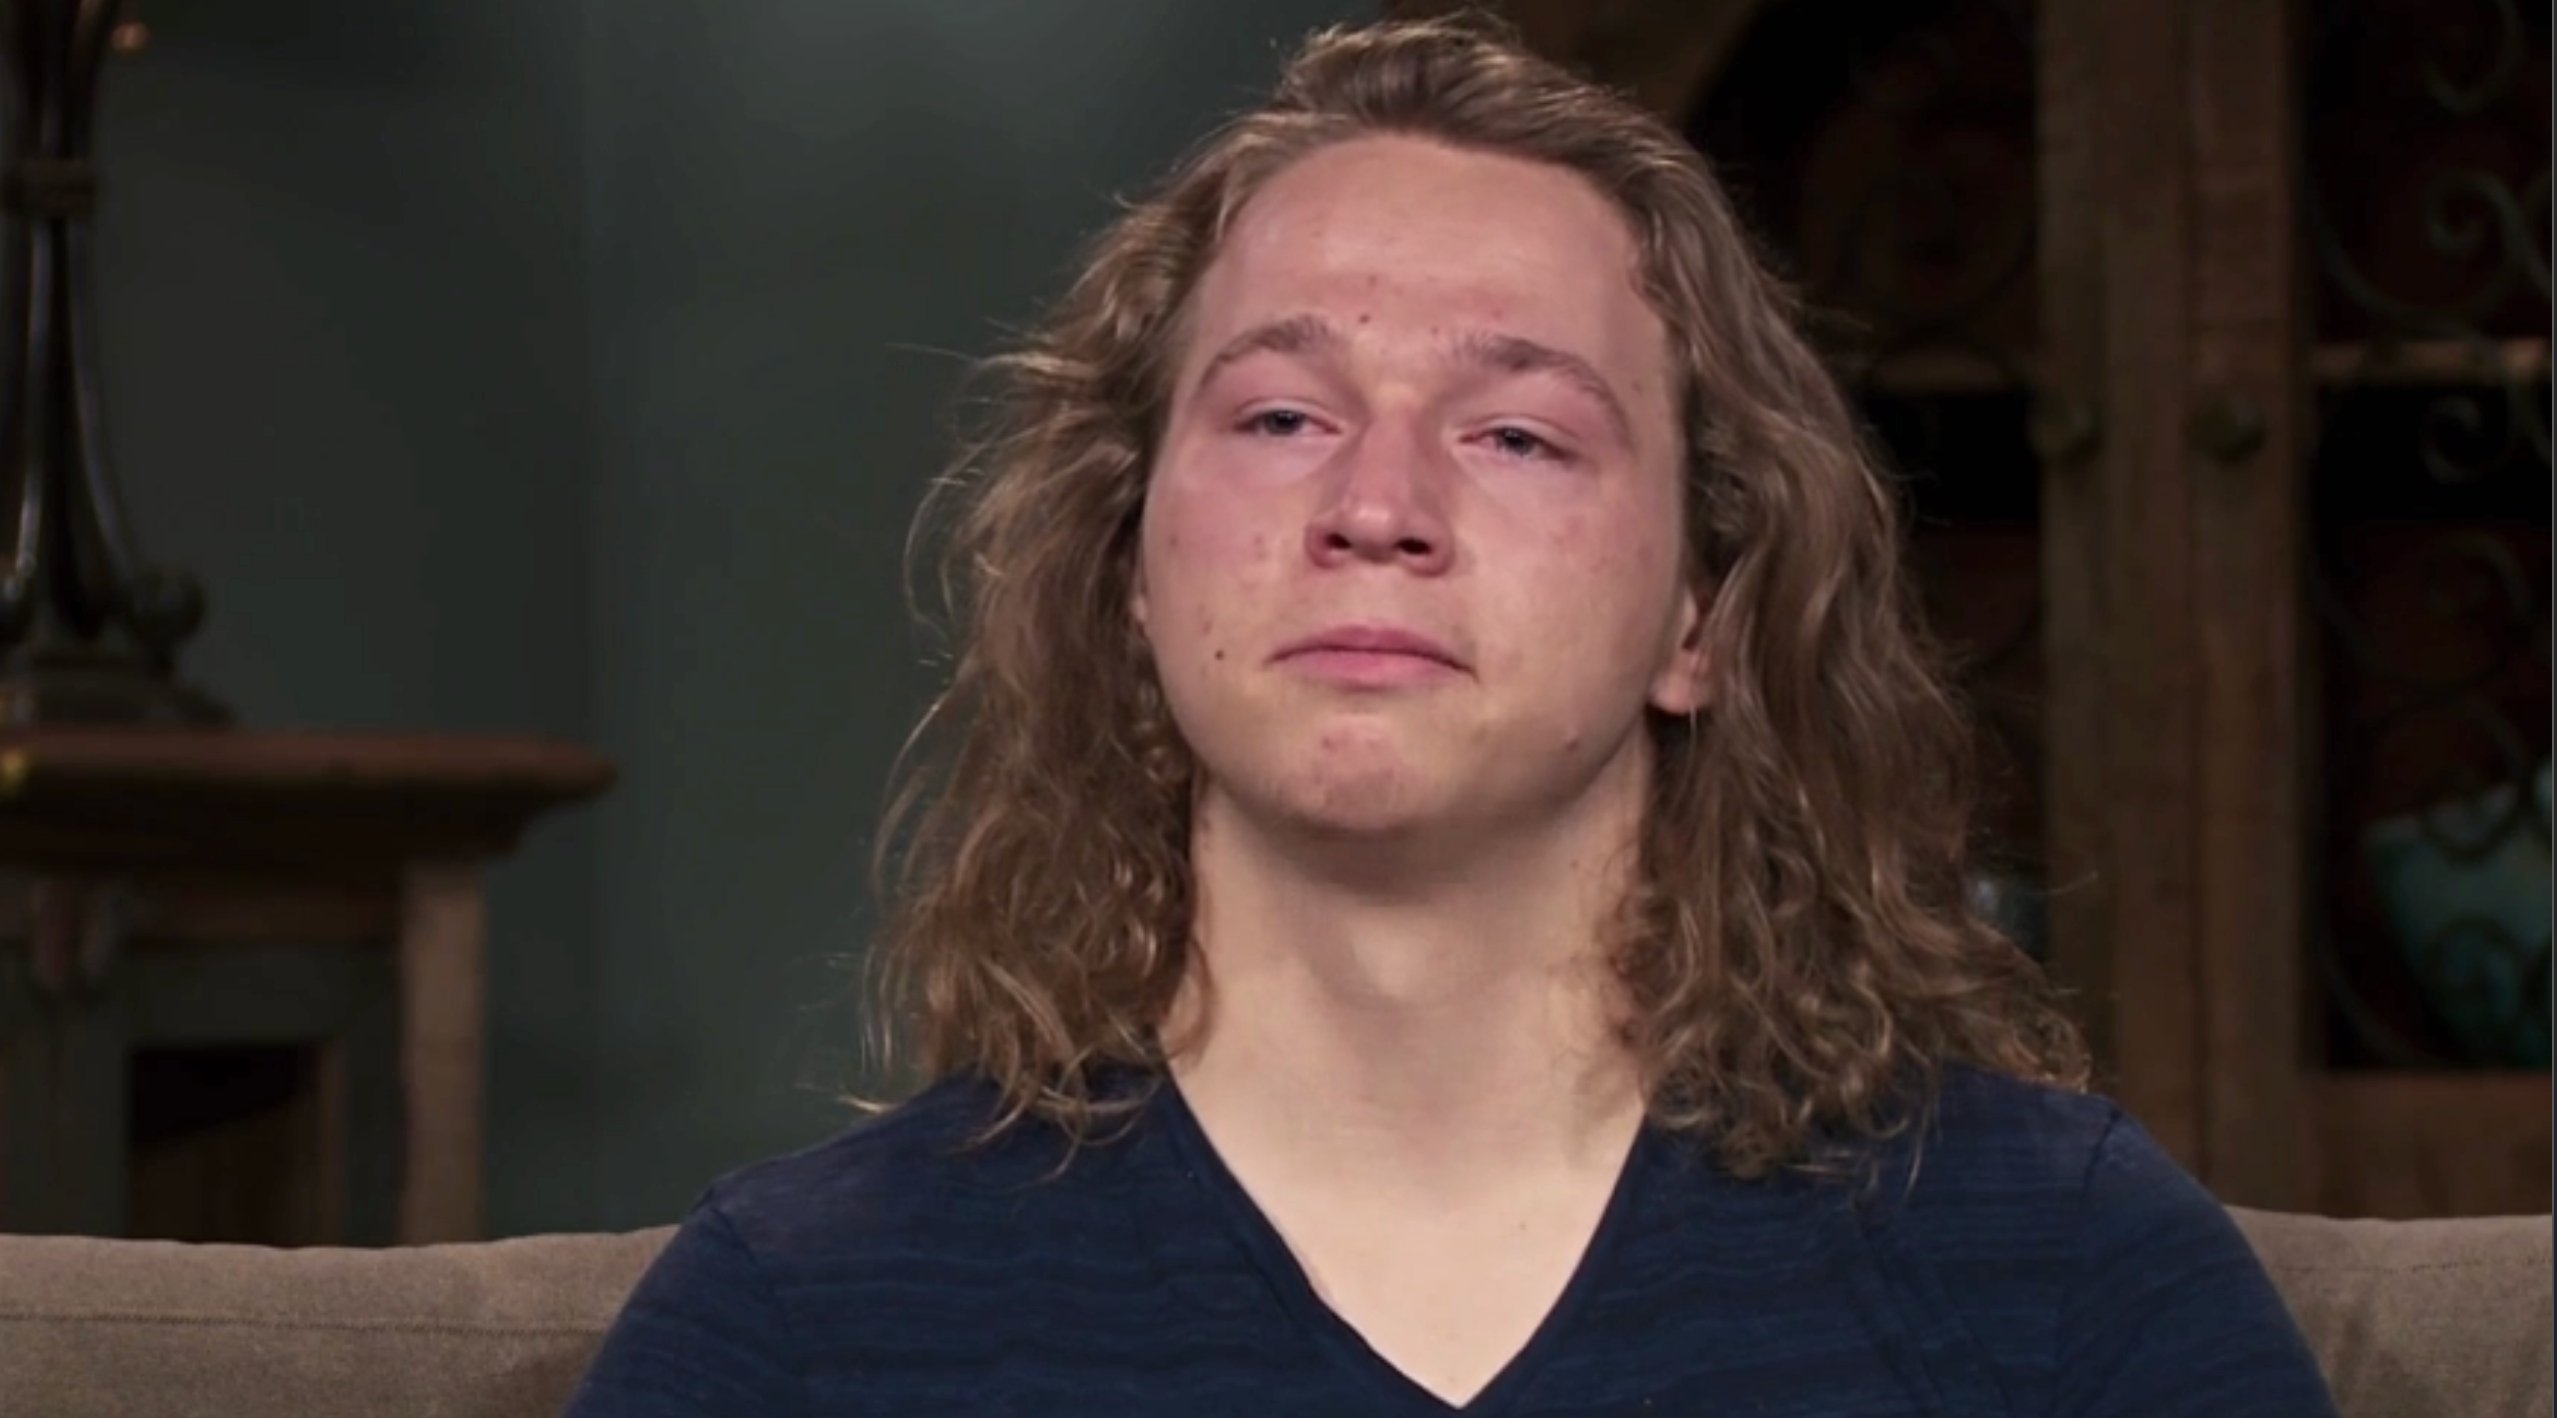 Gabriel 'Gabe' Brown crying during a confessional wearing a navy blue shirt on 'Sister Wives.'